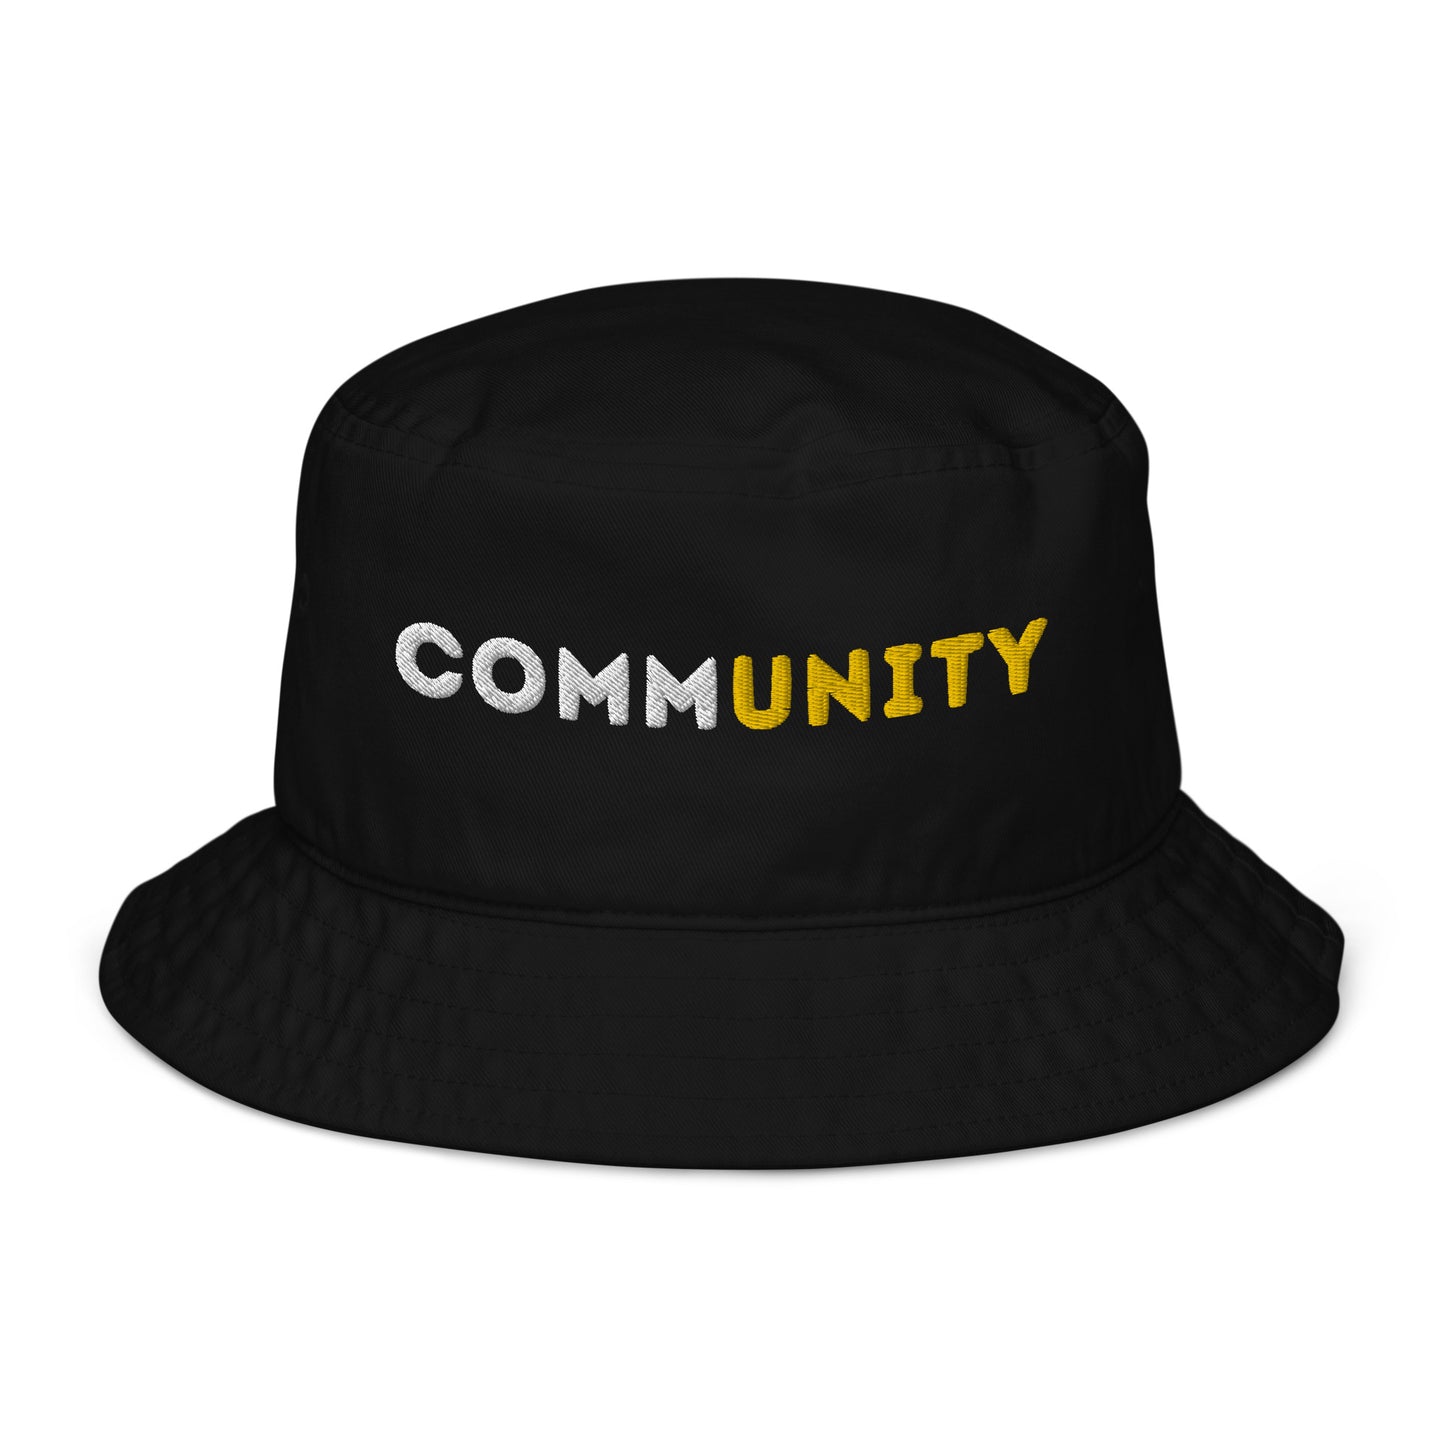 "CommUNITY" Embroidered Organic Bucket Hat - Hats - Inspired by Change